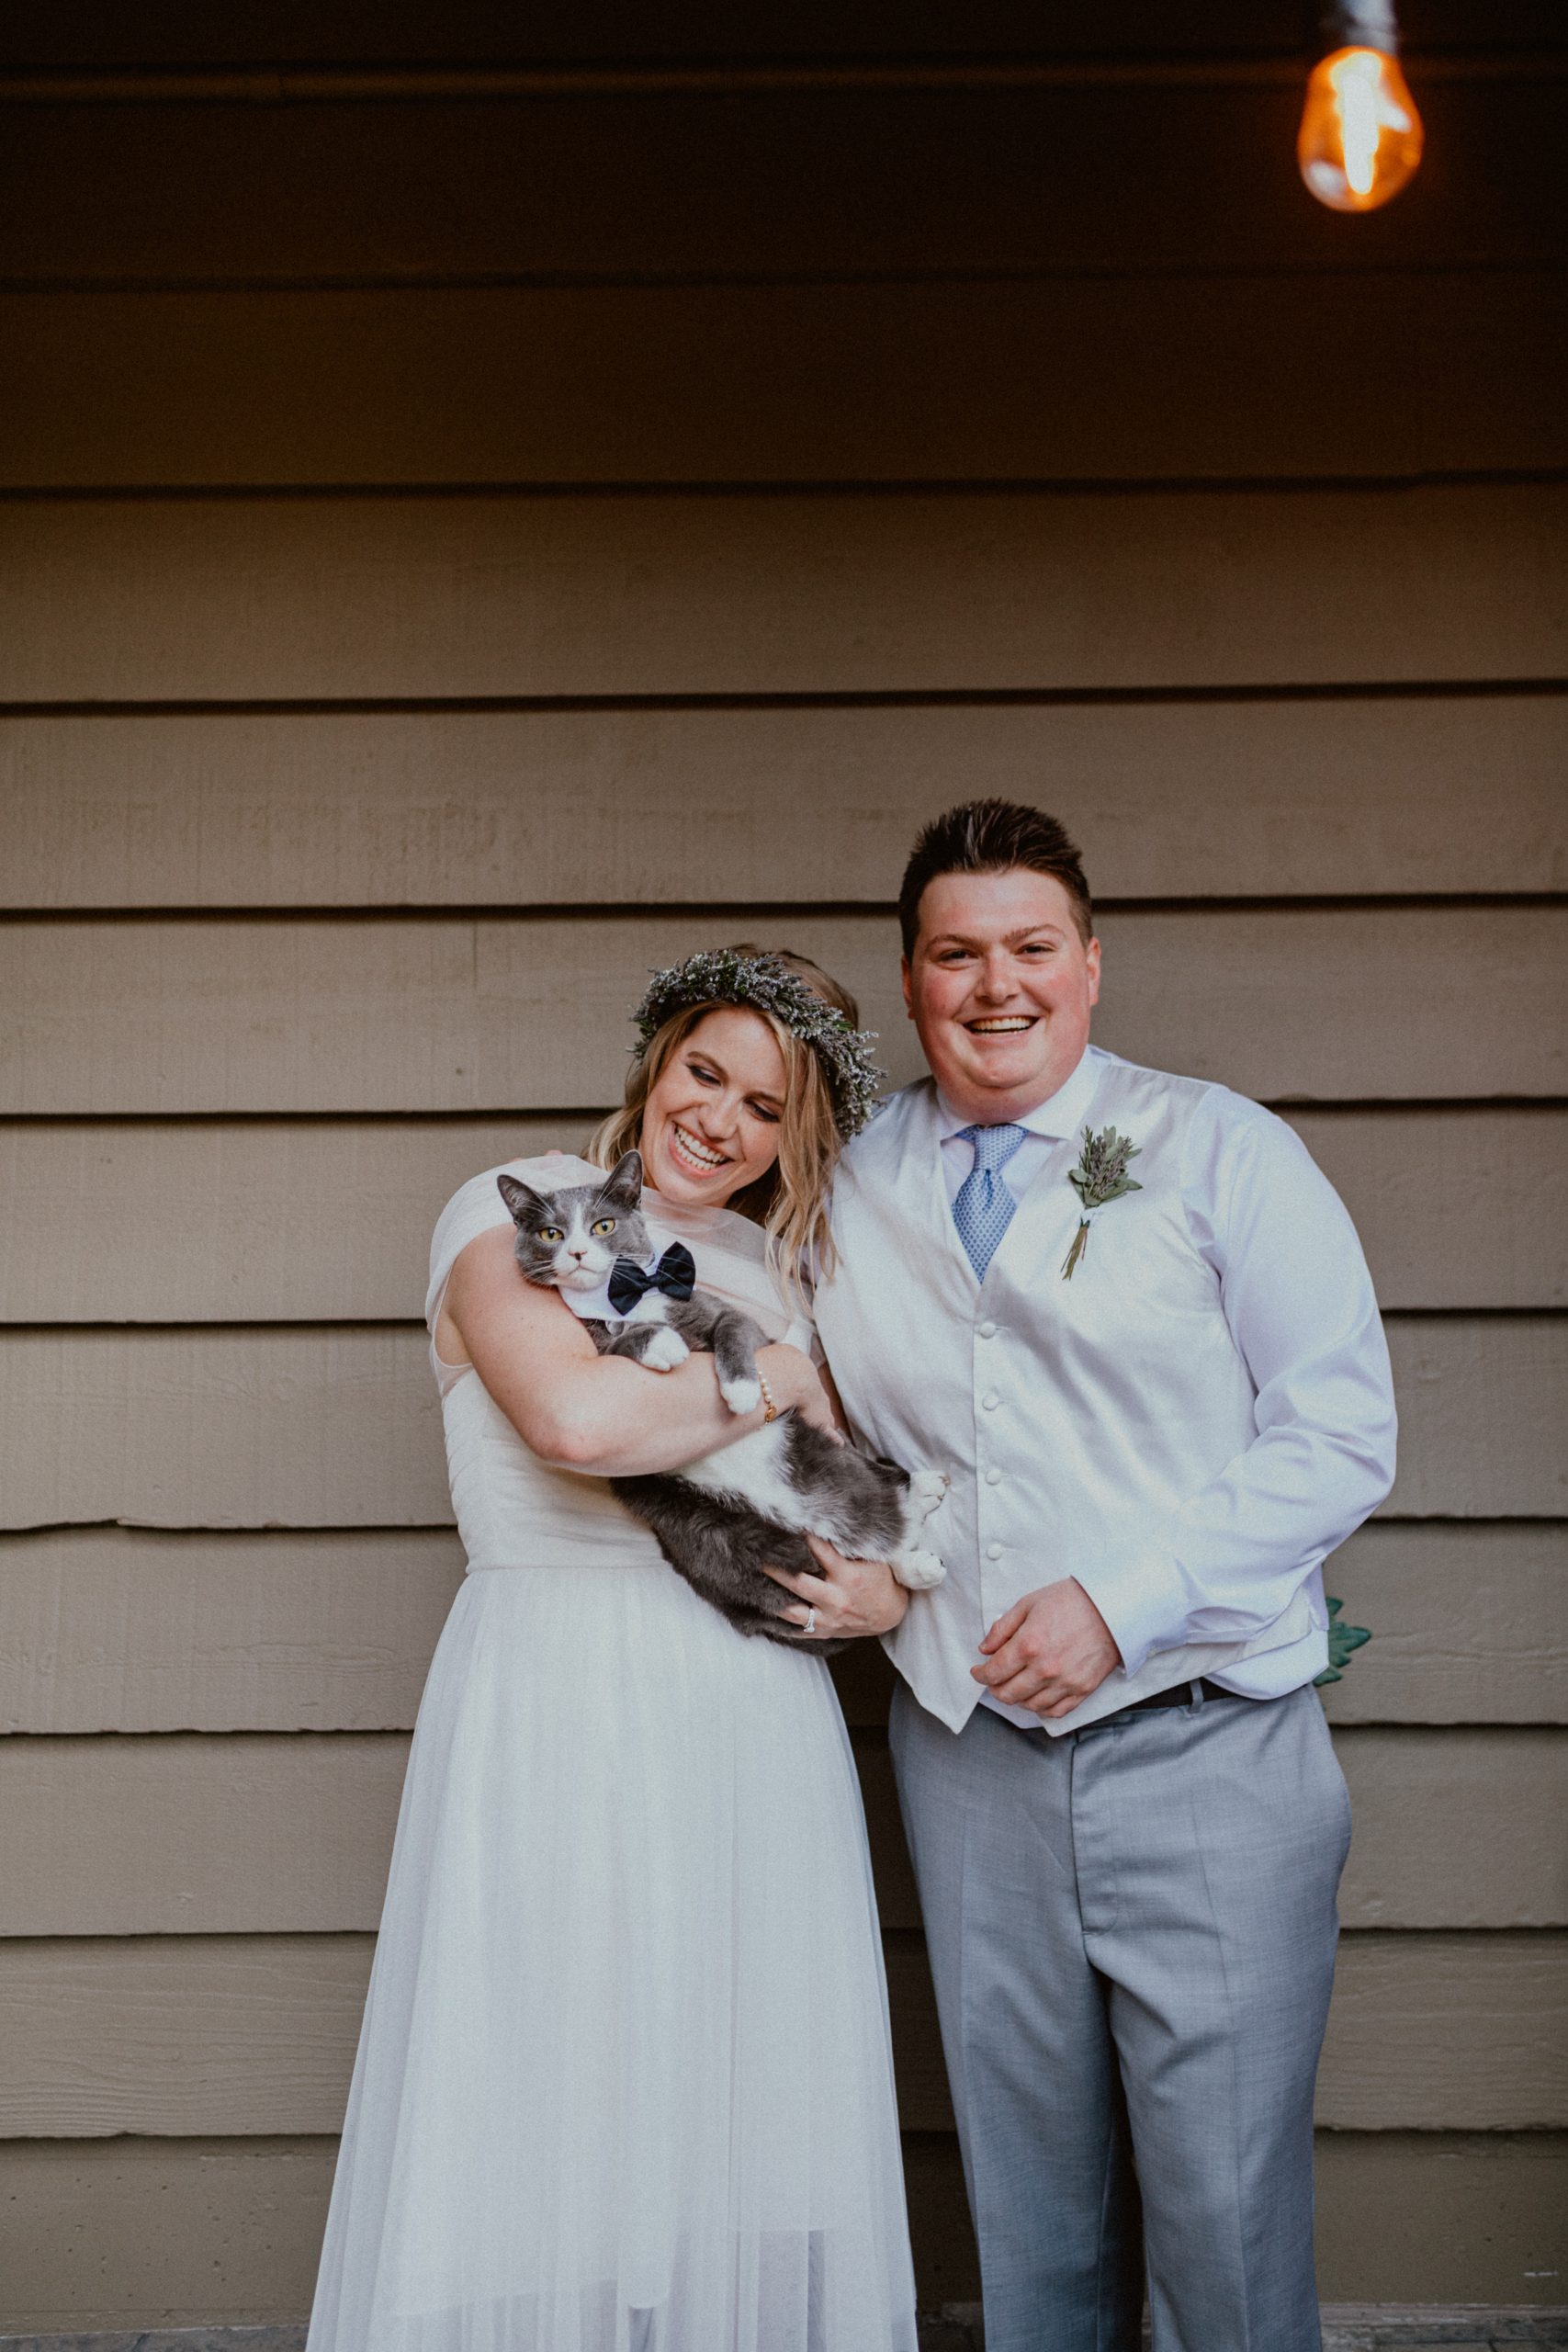 Bride and groom laugh and hold their cat wearing a bowtie after backyard wedding ceremony | Seattle Wedding Photographer, Seattle Elopement Photographer | chelseaabril.com